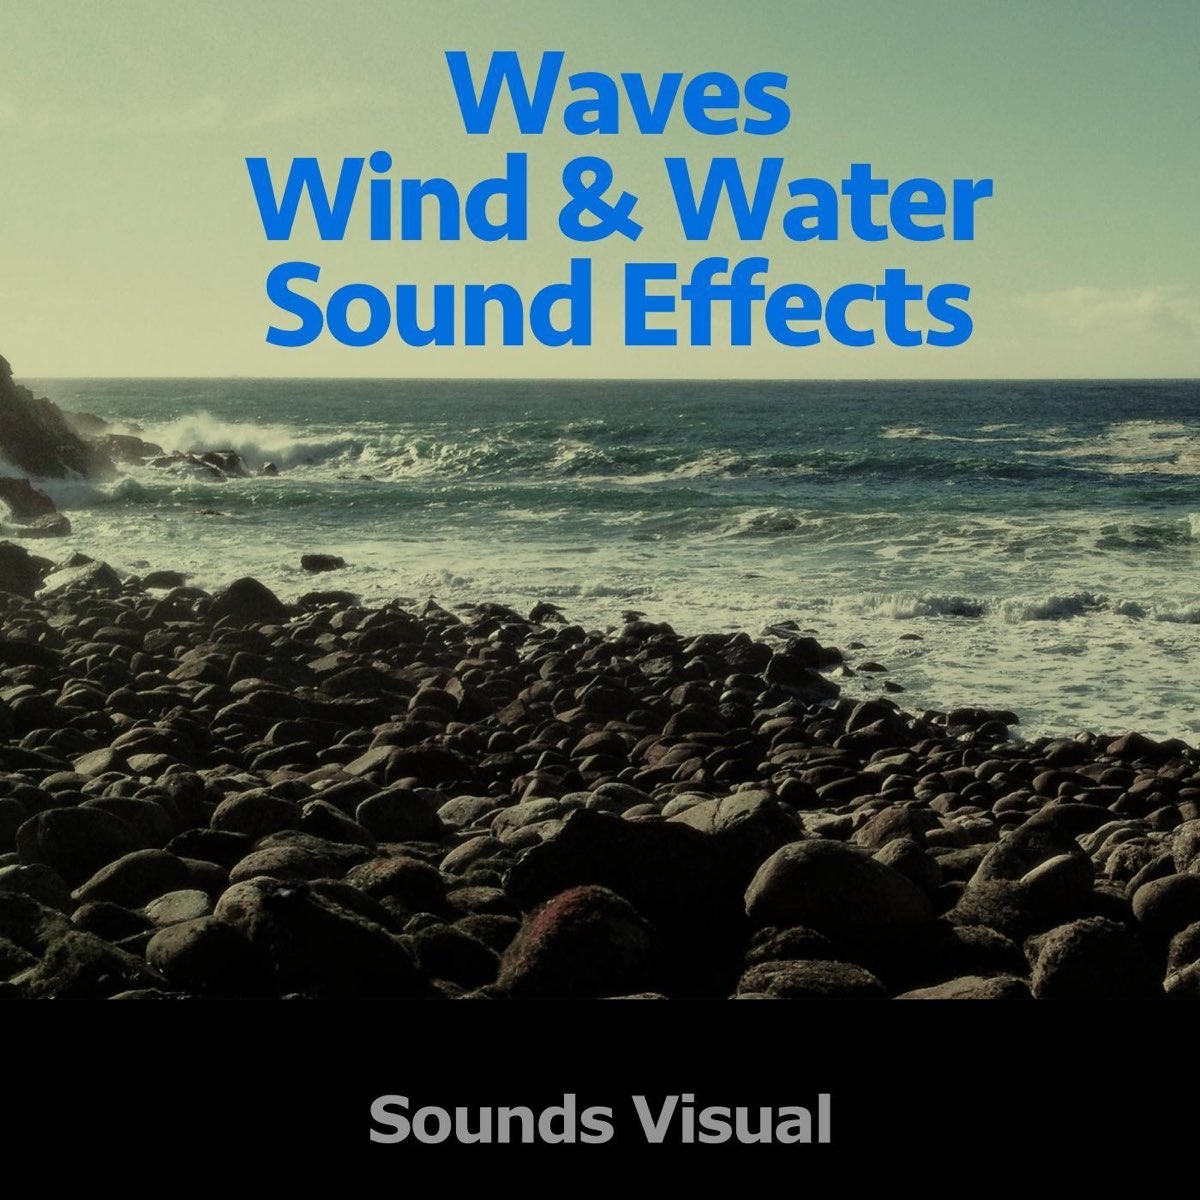 Waves Wind and Water Sound Effects by Sounds Visual on Apple Music